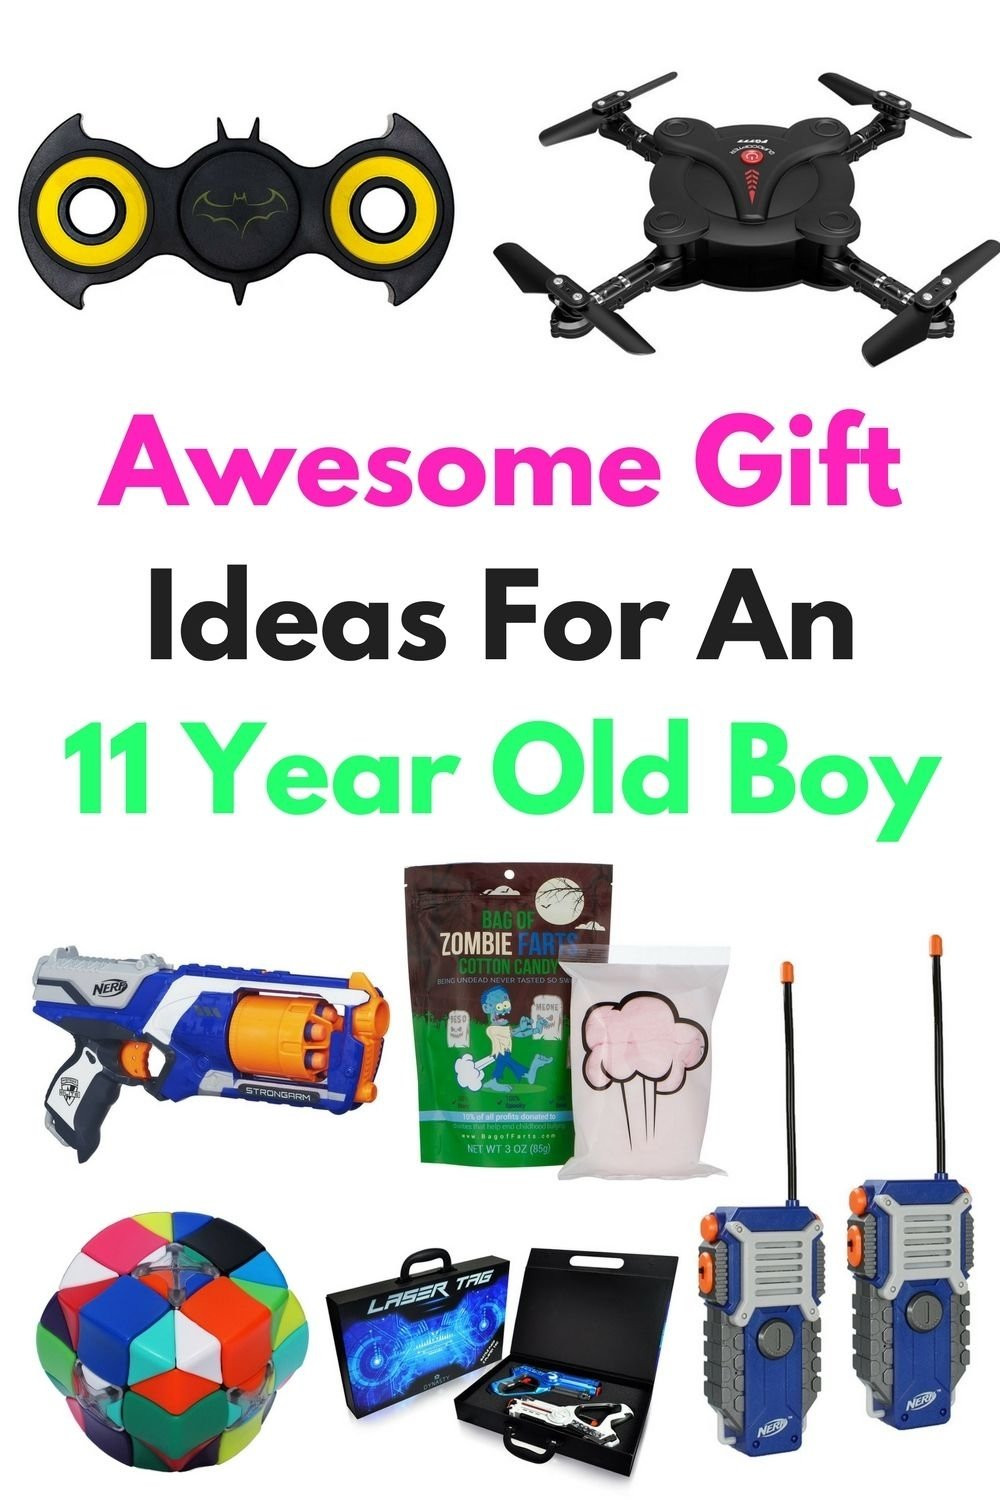 Gift Ideas For 12 Year Old Boys
 10 Attractive 12 Year Old Boy Christmas Gift Ideas 2020